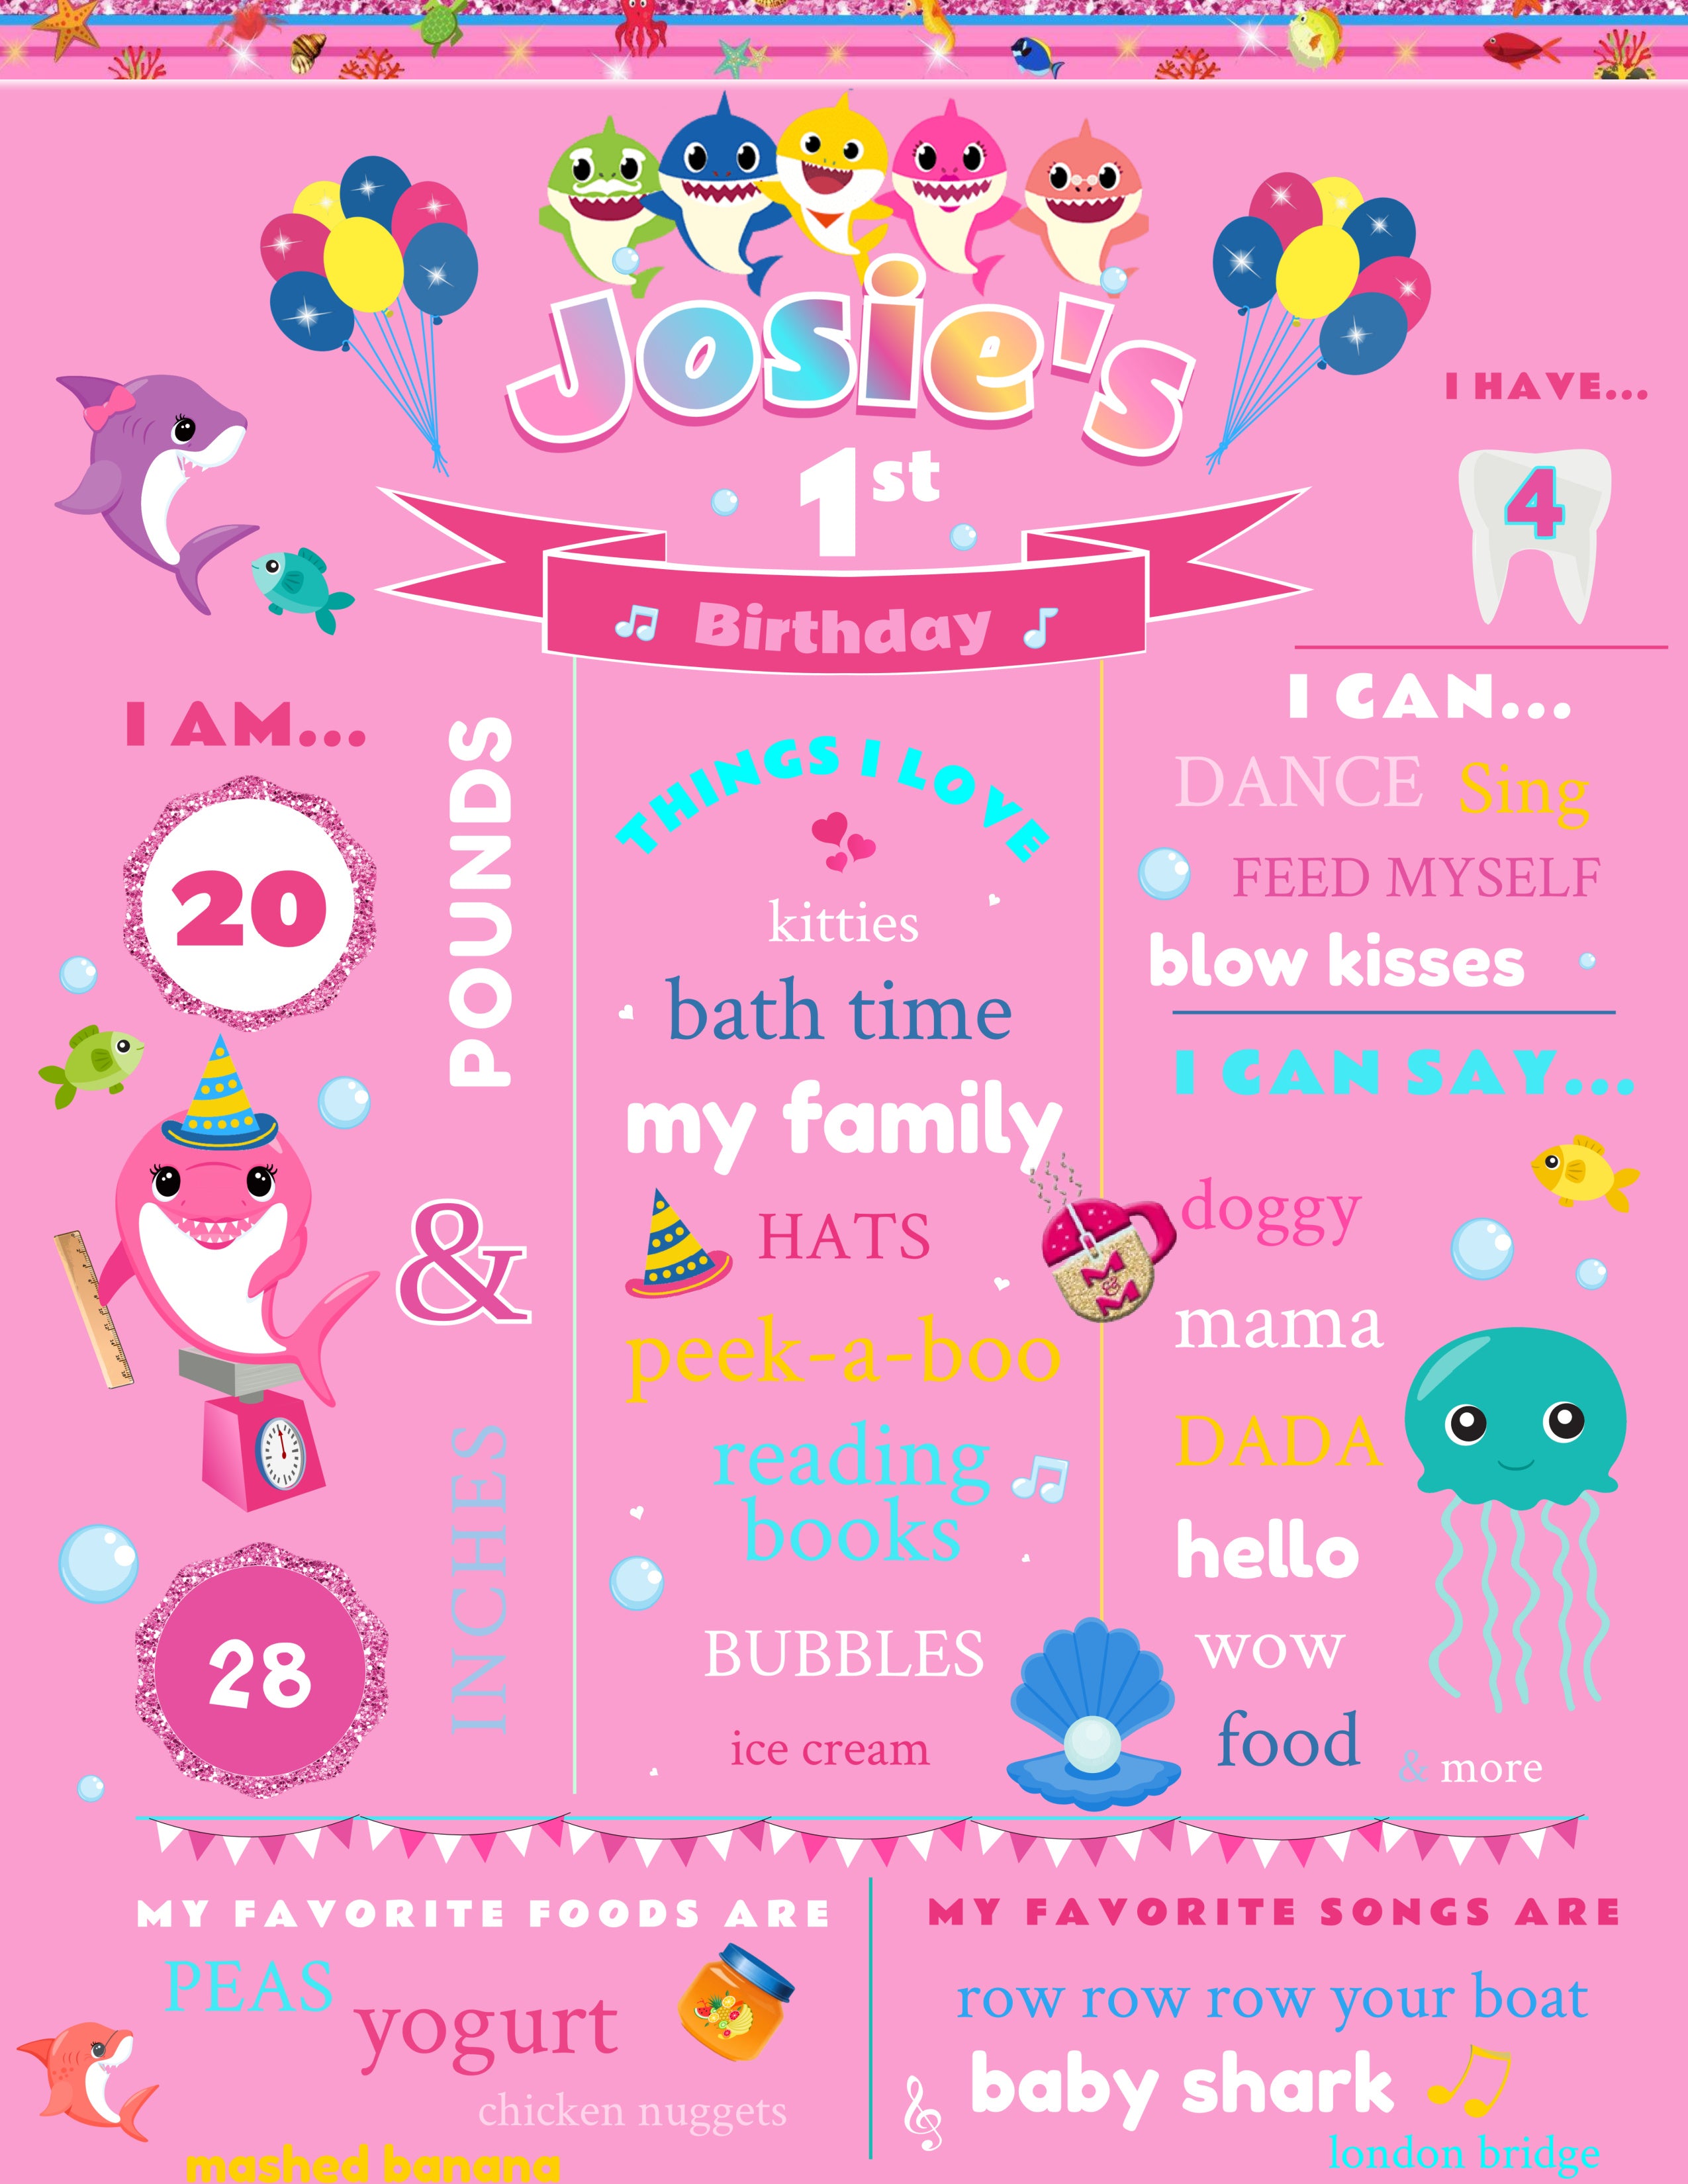 Editable Pink Shark Party Milestone Board 18x24", Pink Shark Party Poster Board